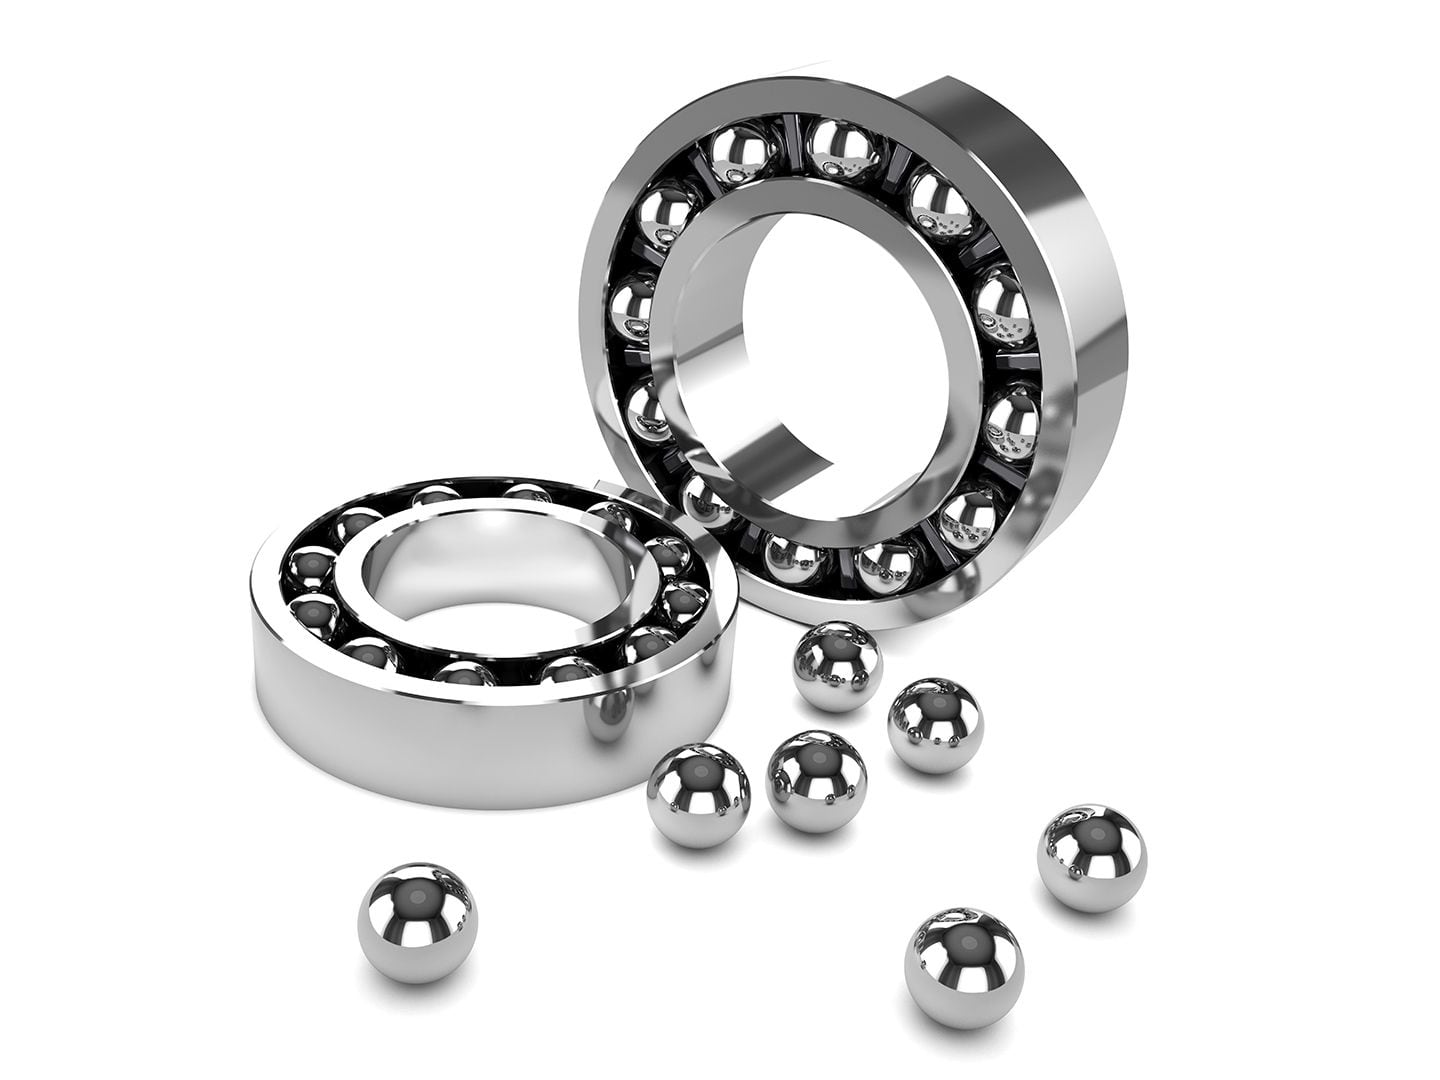 Ball bearings have a much lower starting friction compared to plain oil film bearings.